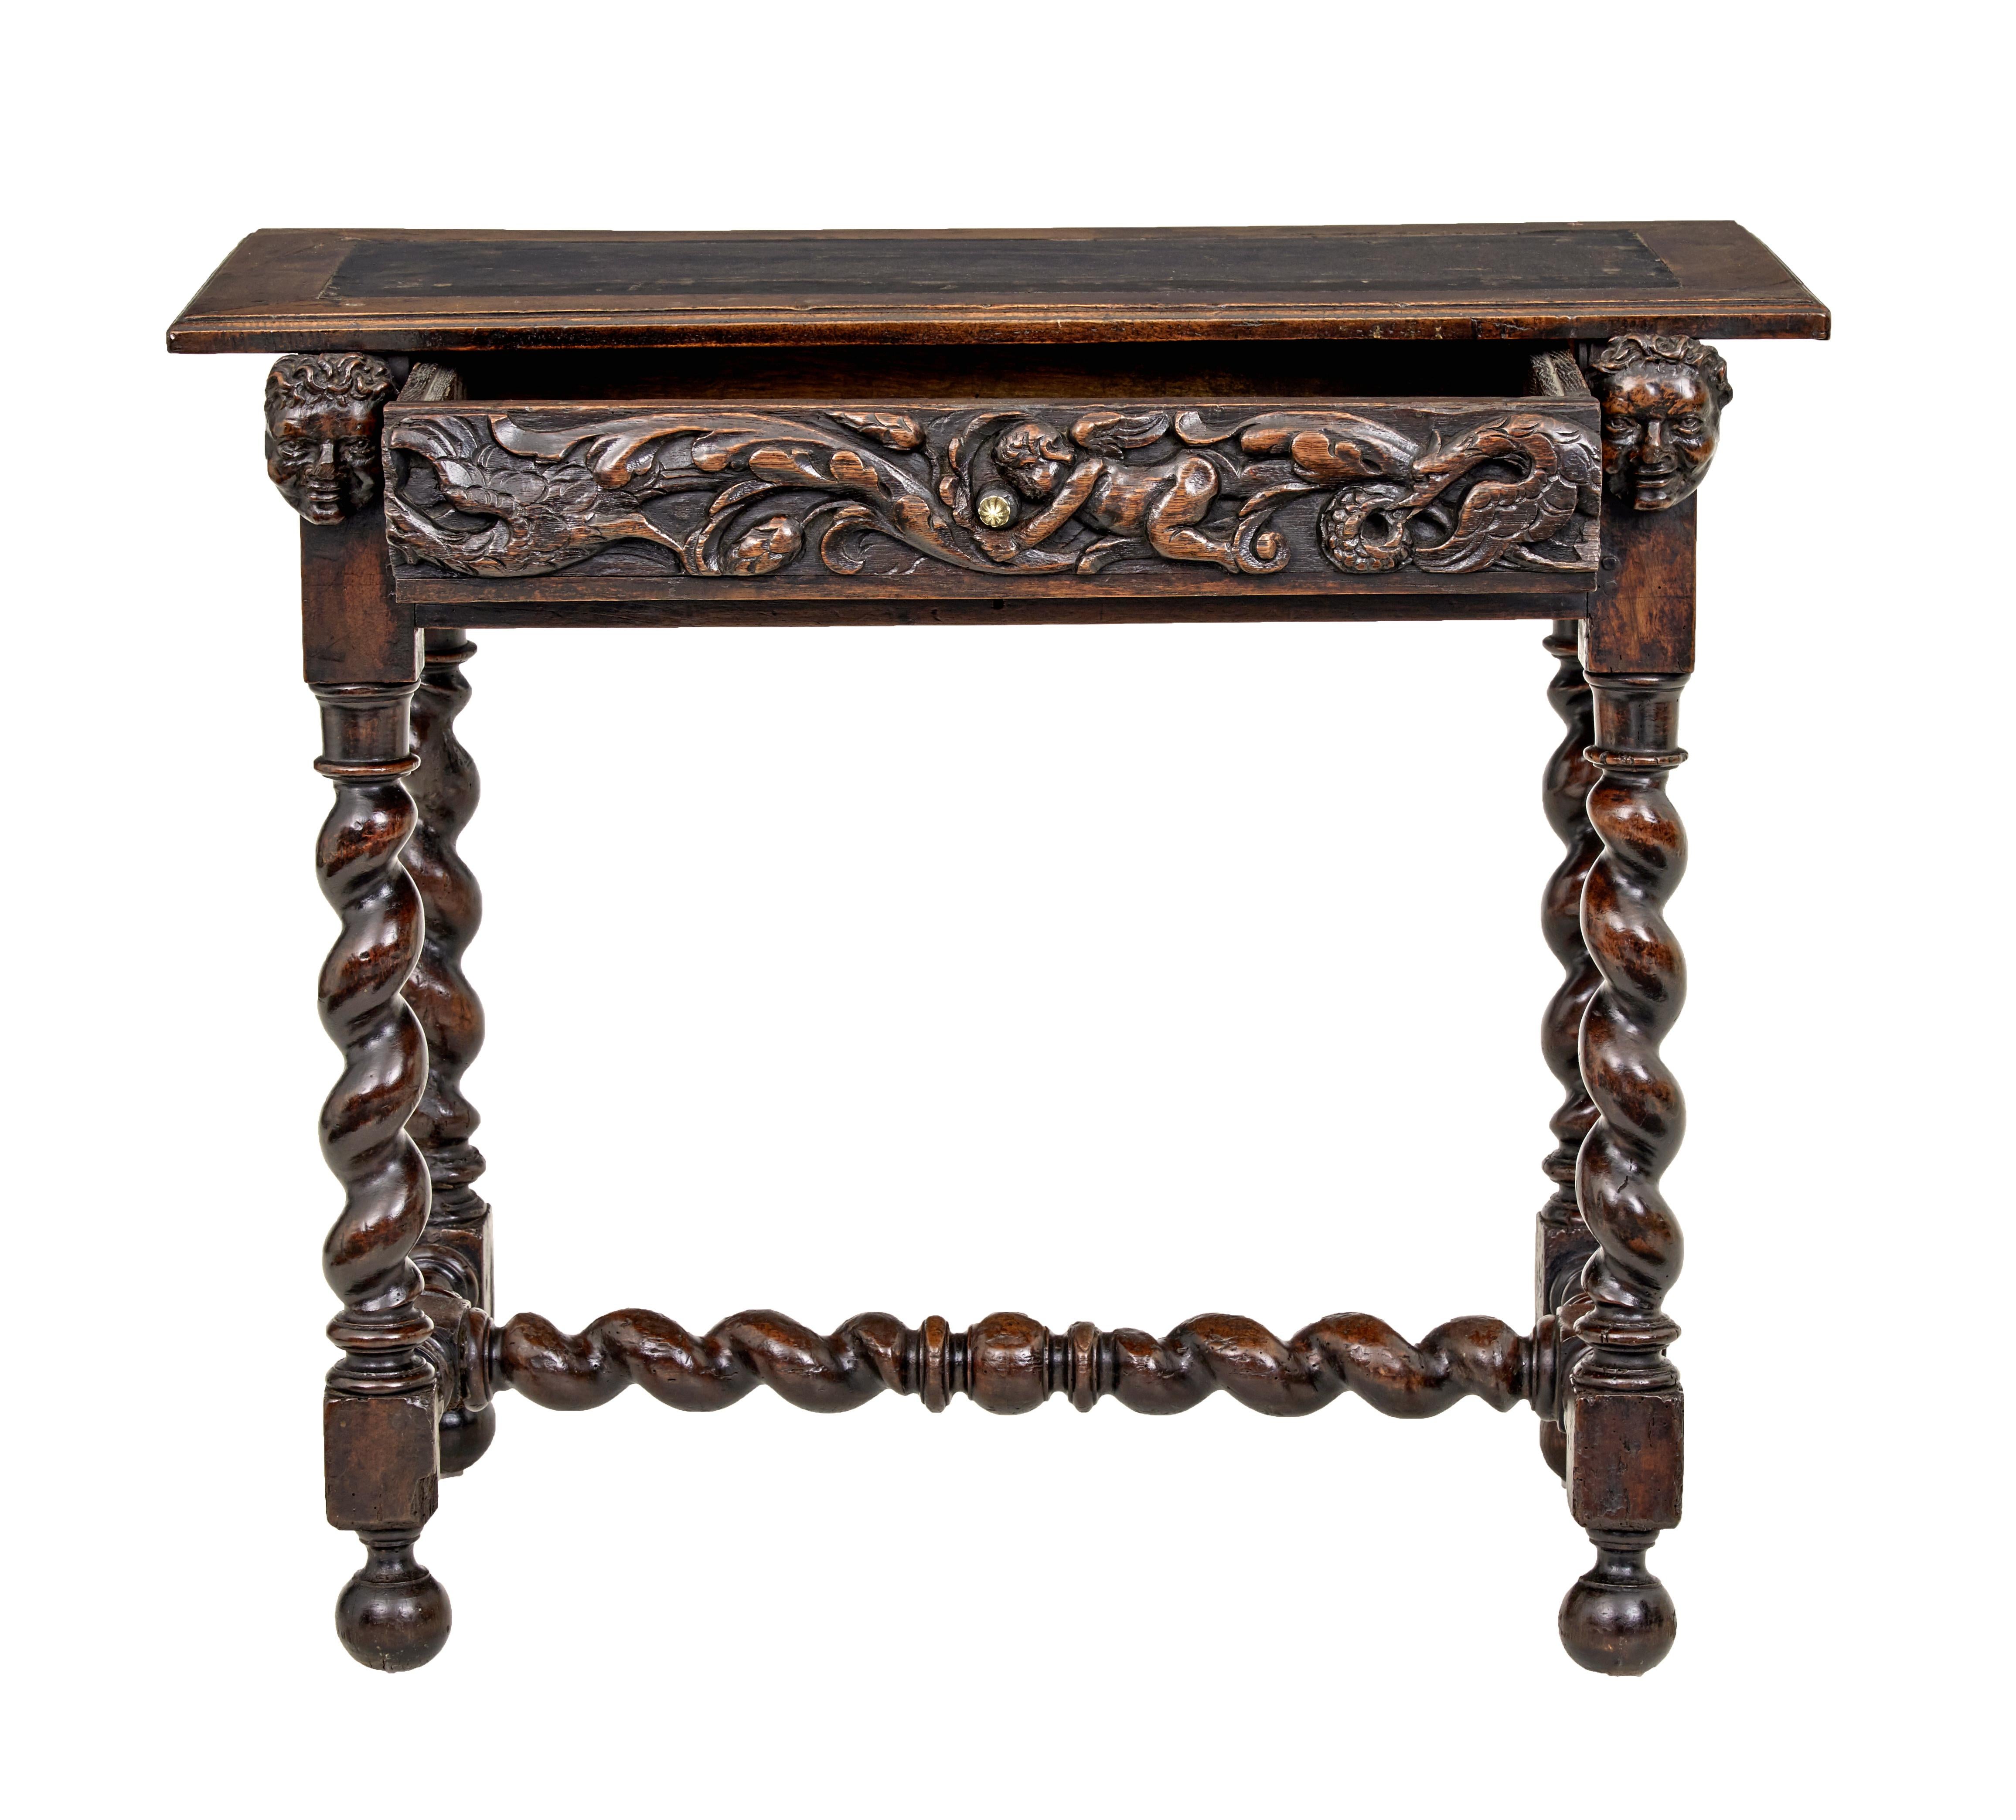 Baroque Revival Early 19th century Flemish carved walnut side table For Sale